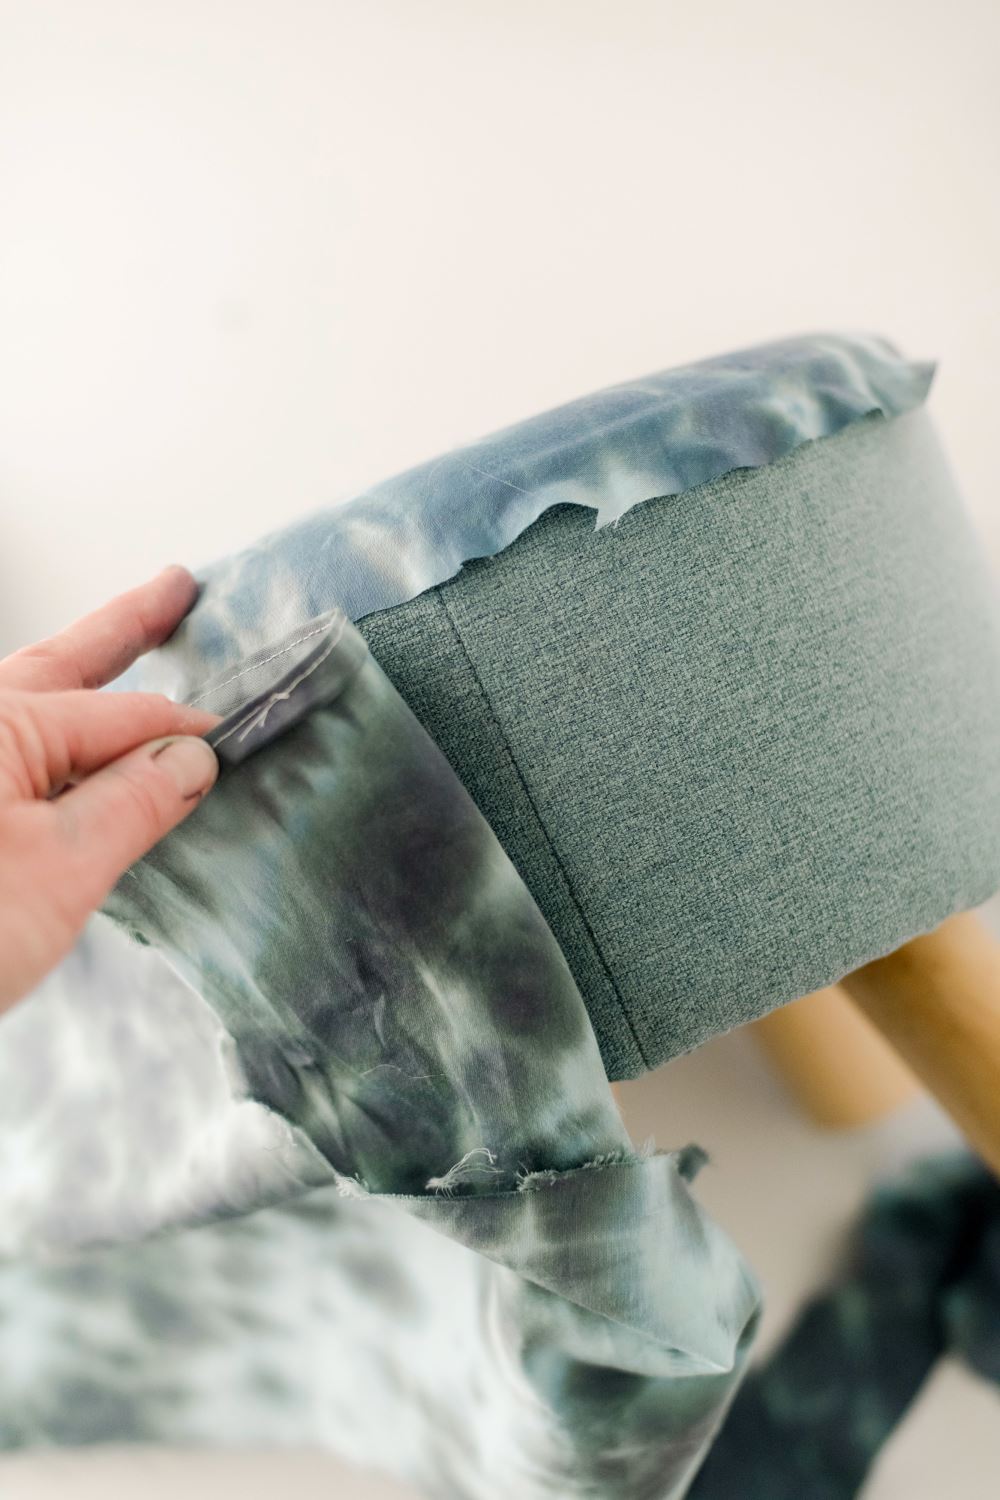 Wrap fabric along the long edge of your furniture.